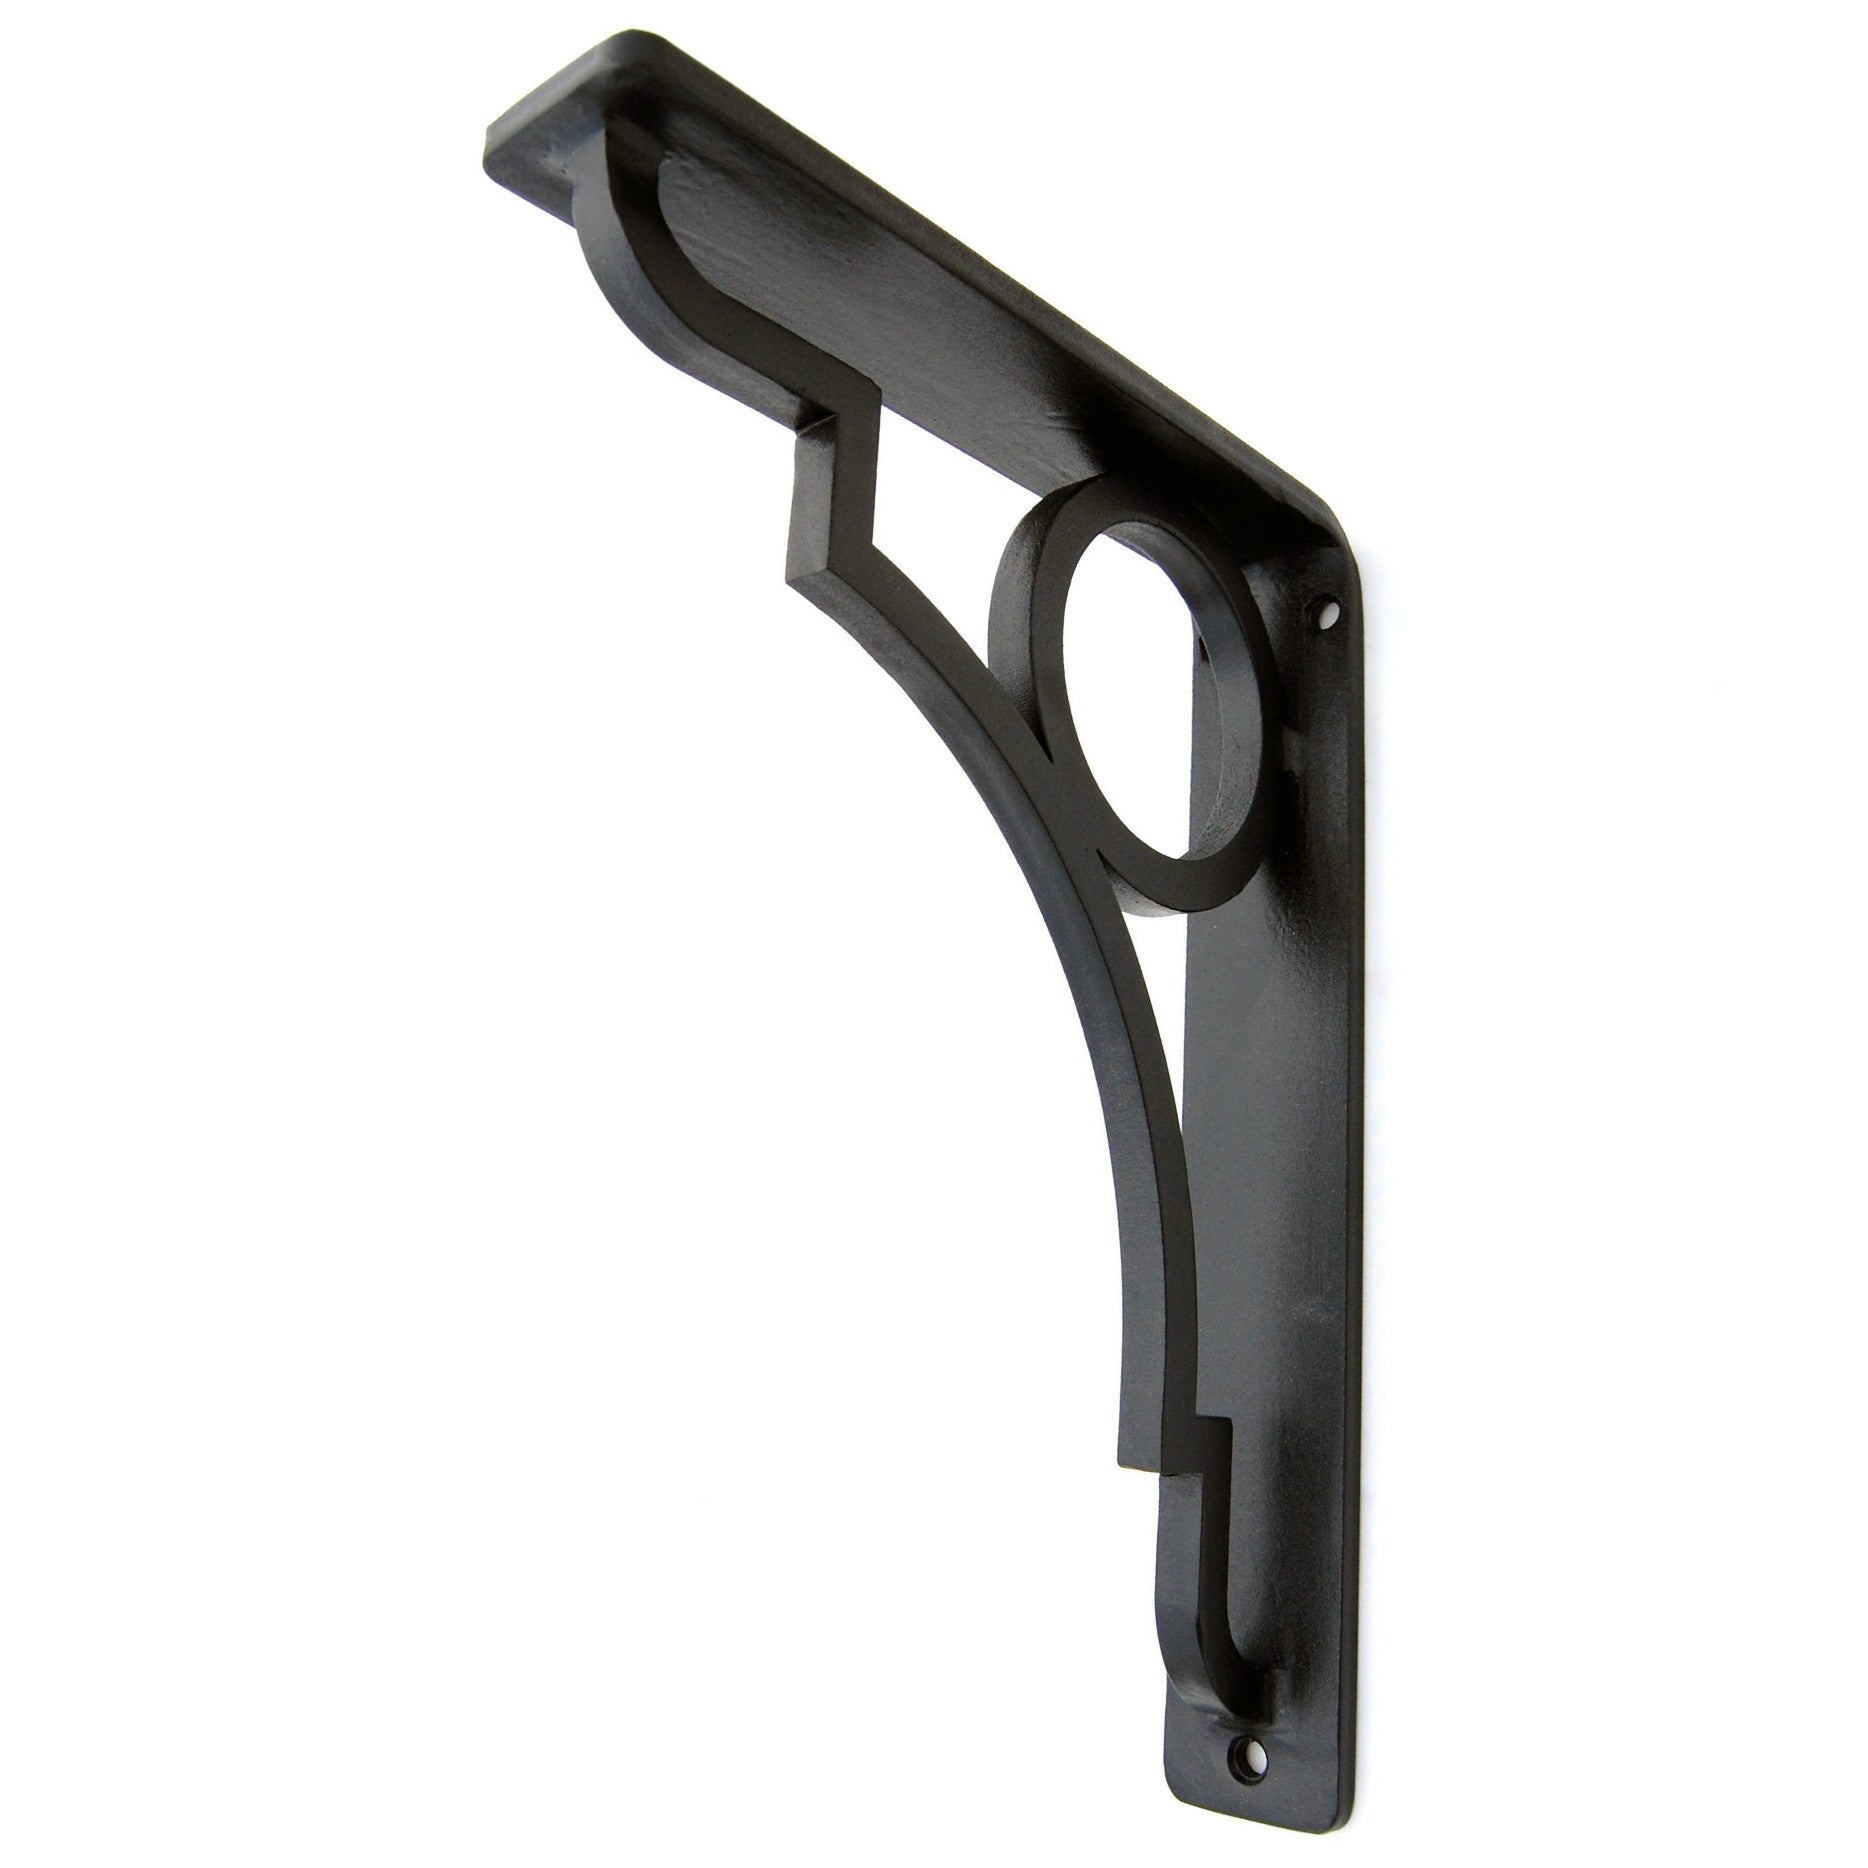 This is our Grant Iron Shelf Bracket with a black iron finish